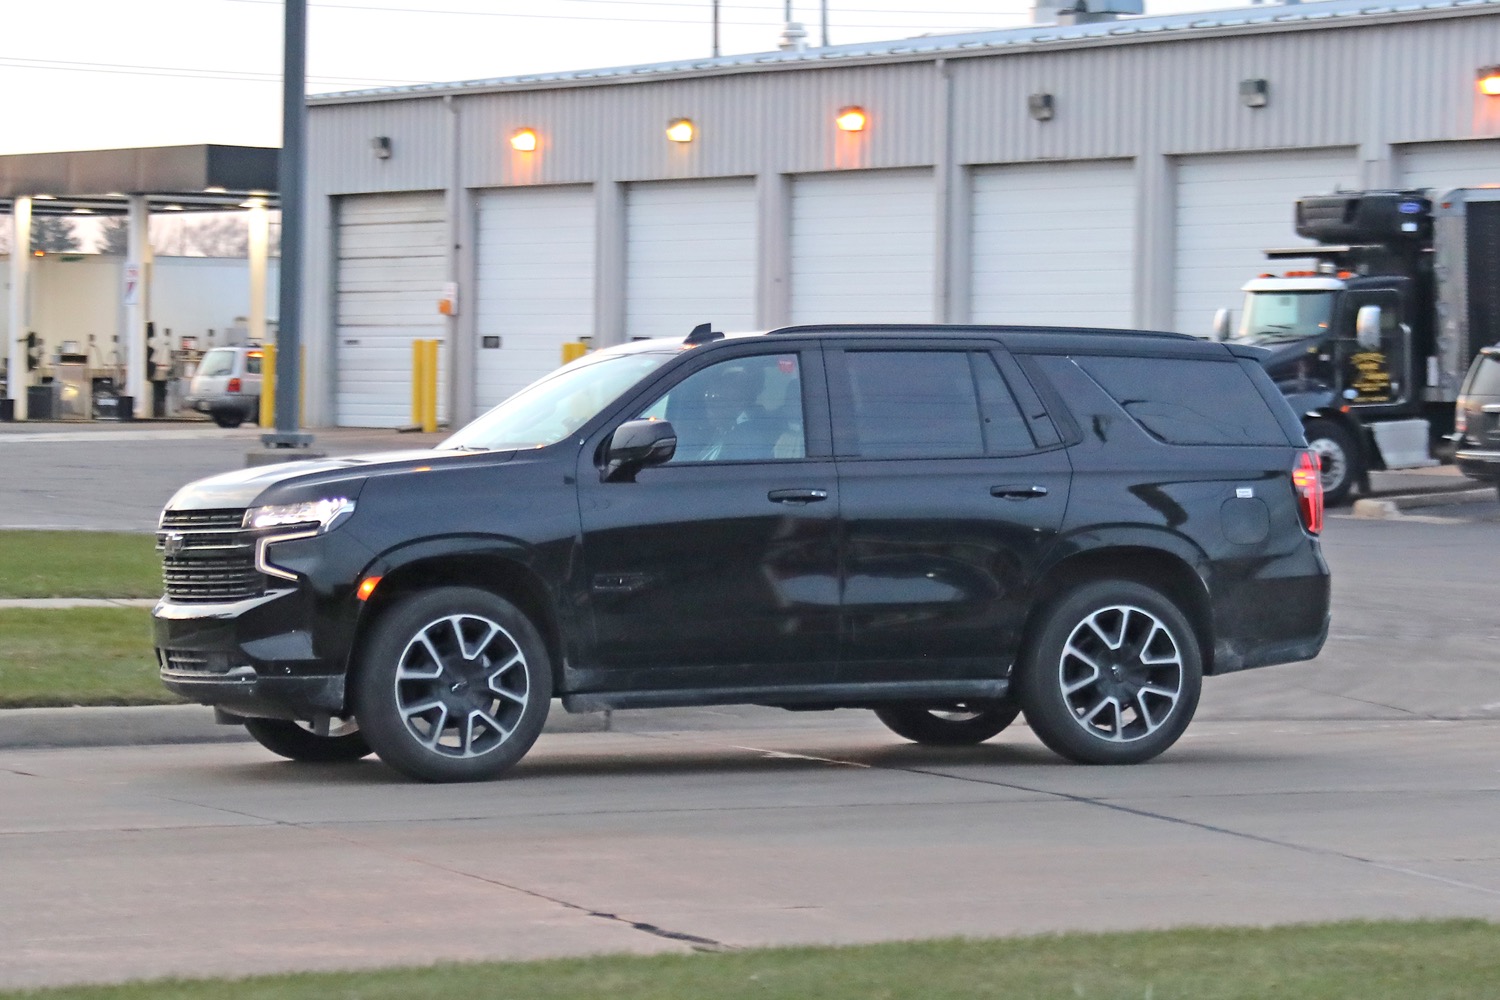 2021 Chevrolet Tahoe Rst On The Street Live Photo Gallery